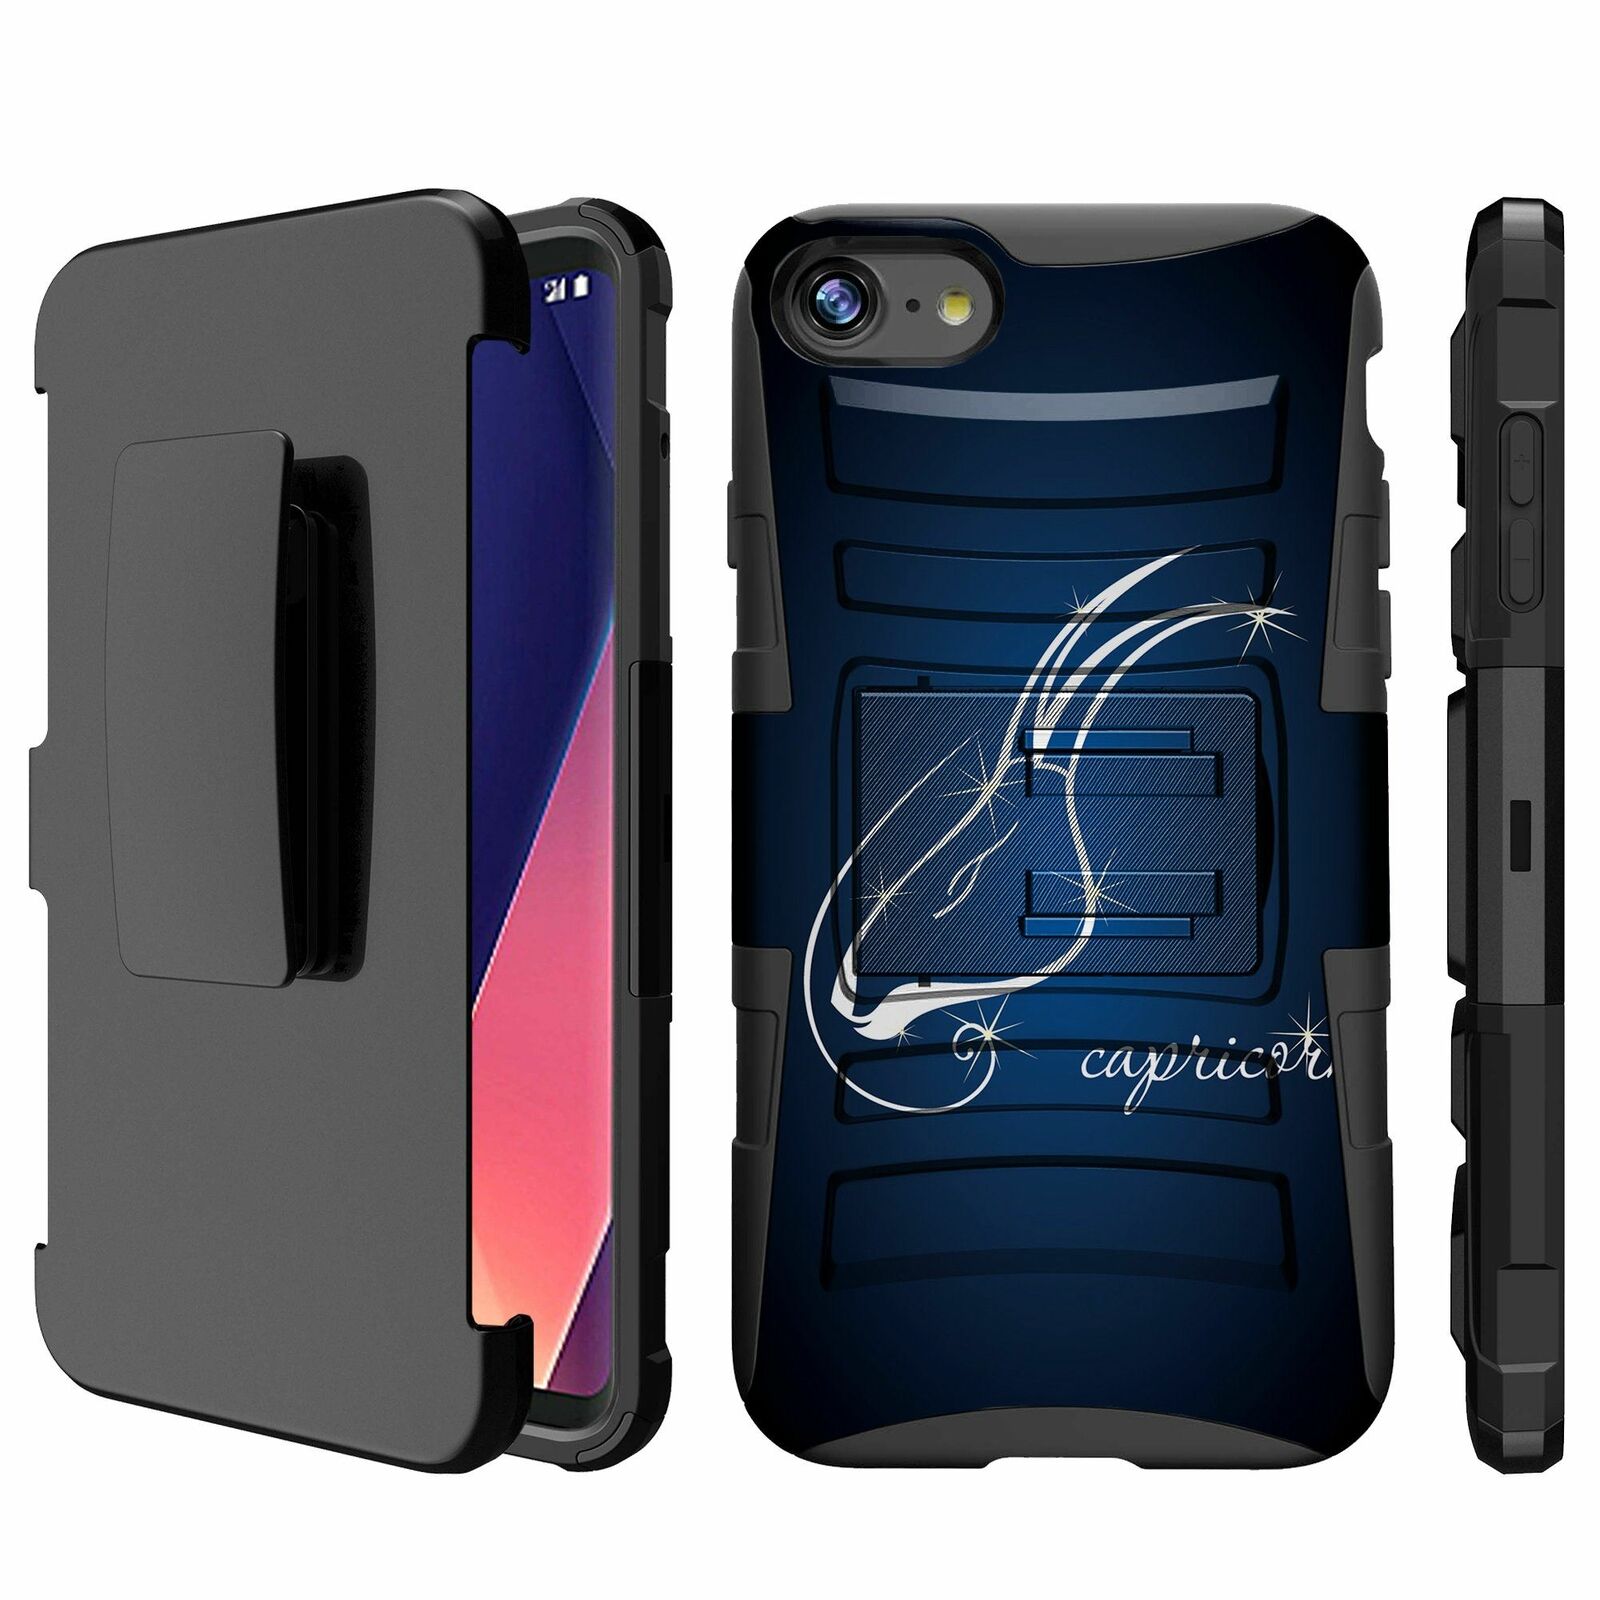 For Apple iPhone 7 | iPhone 7 2016 Holster & Kickstand Combo Case-Zodiac Signs iPhone Cases AtlasCase Capricorn 